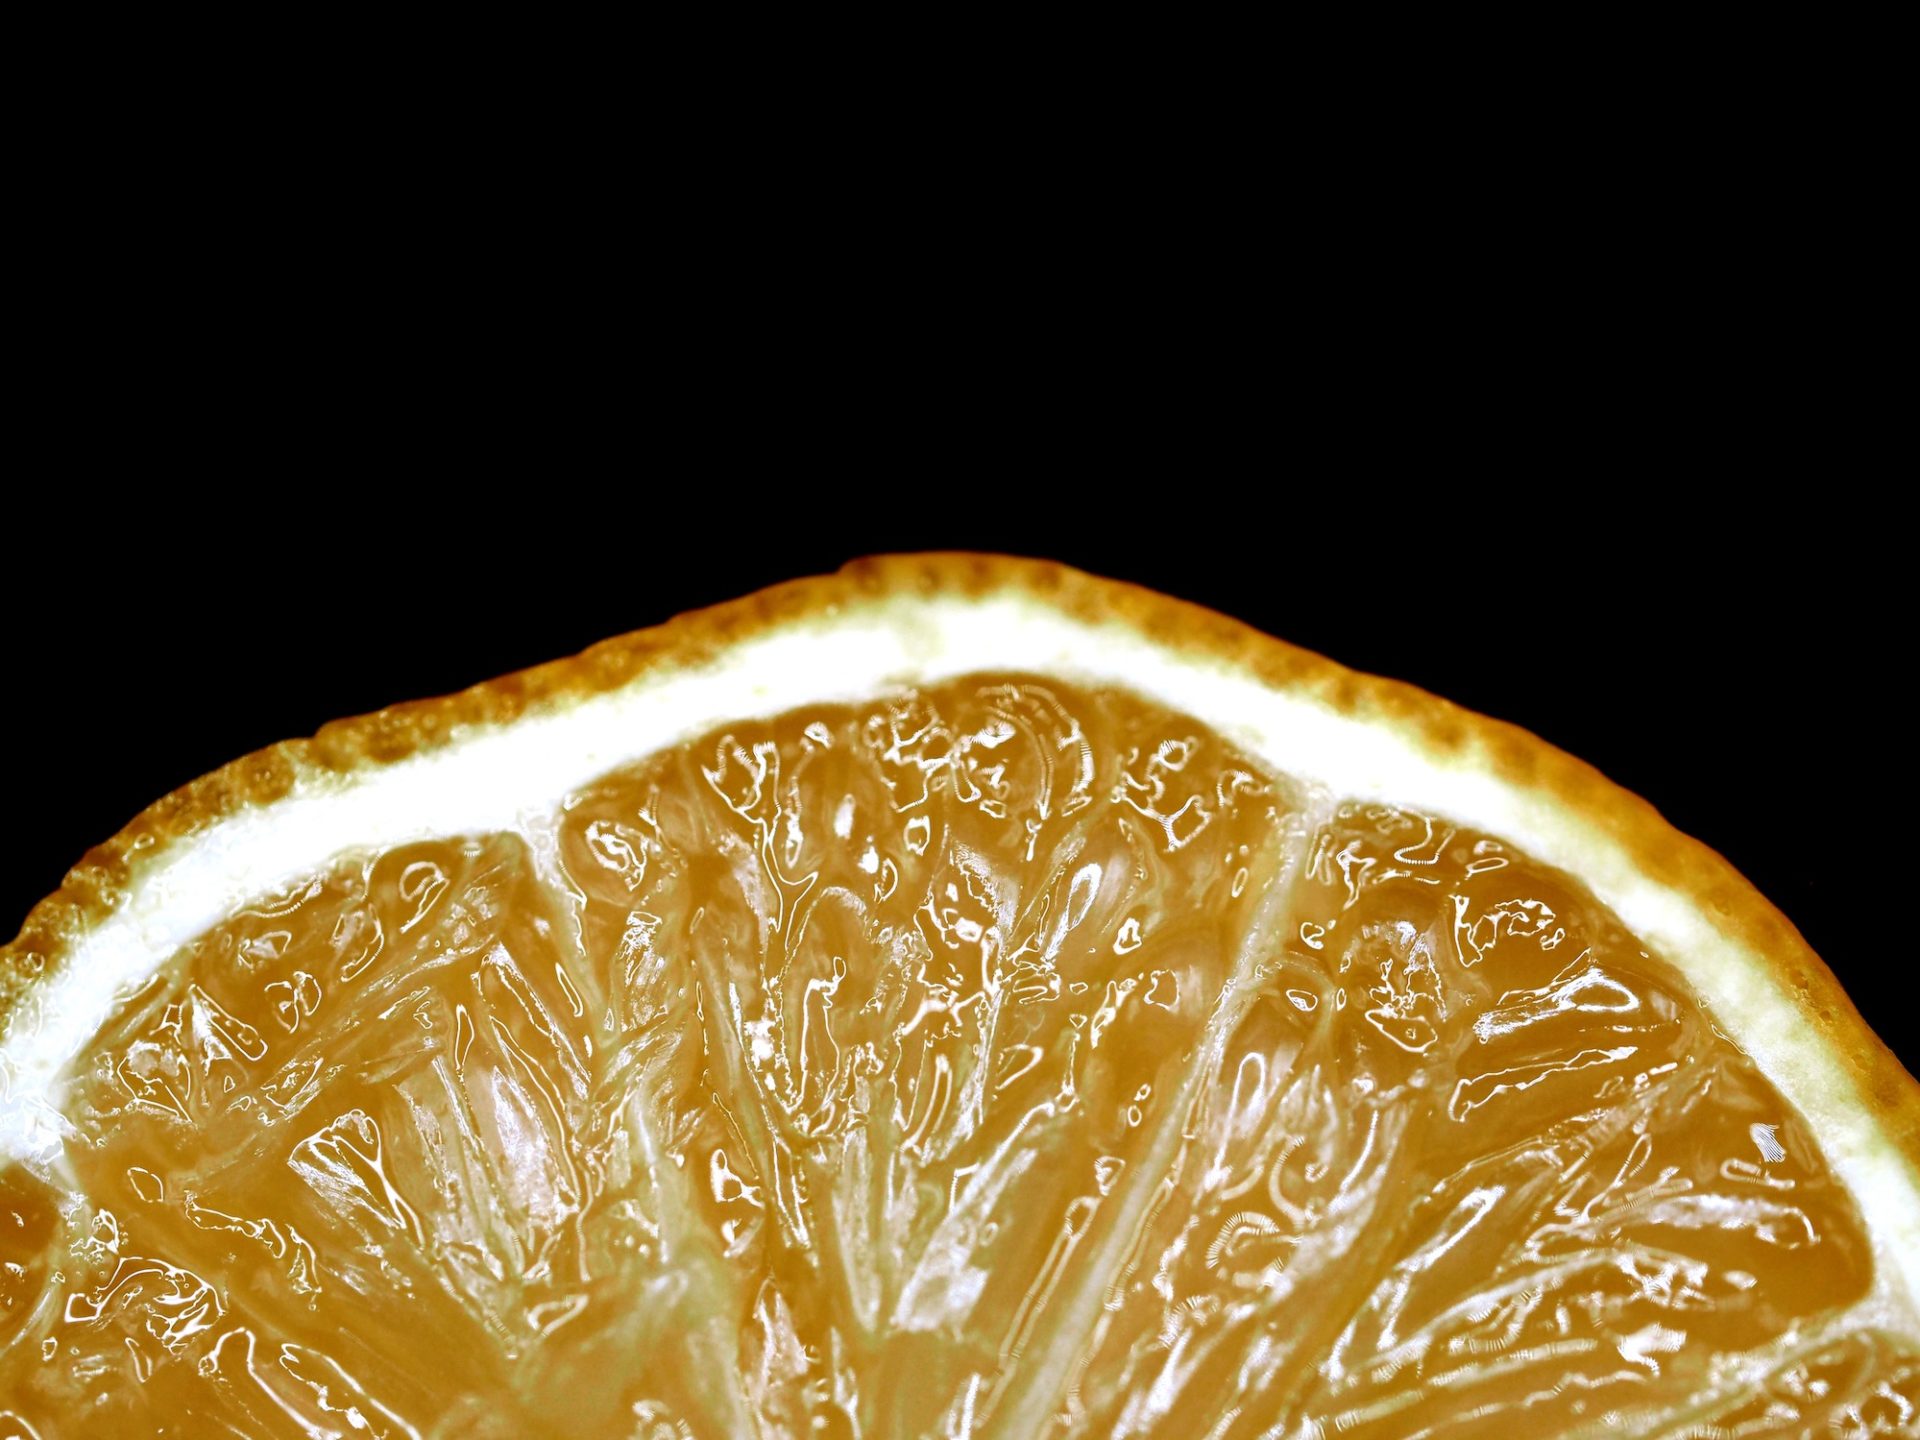 Close up of a small piece of a lemon against a black backdrop